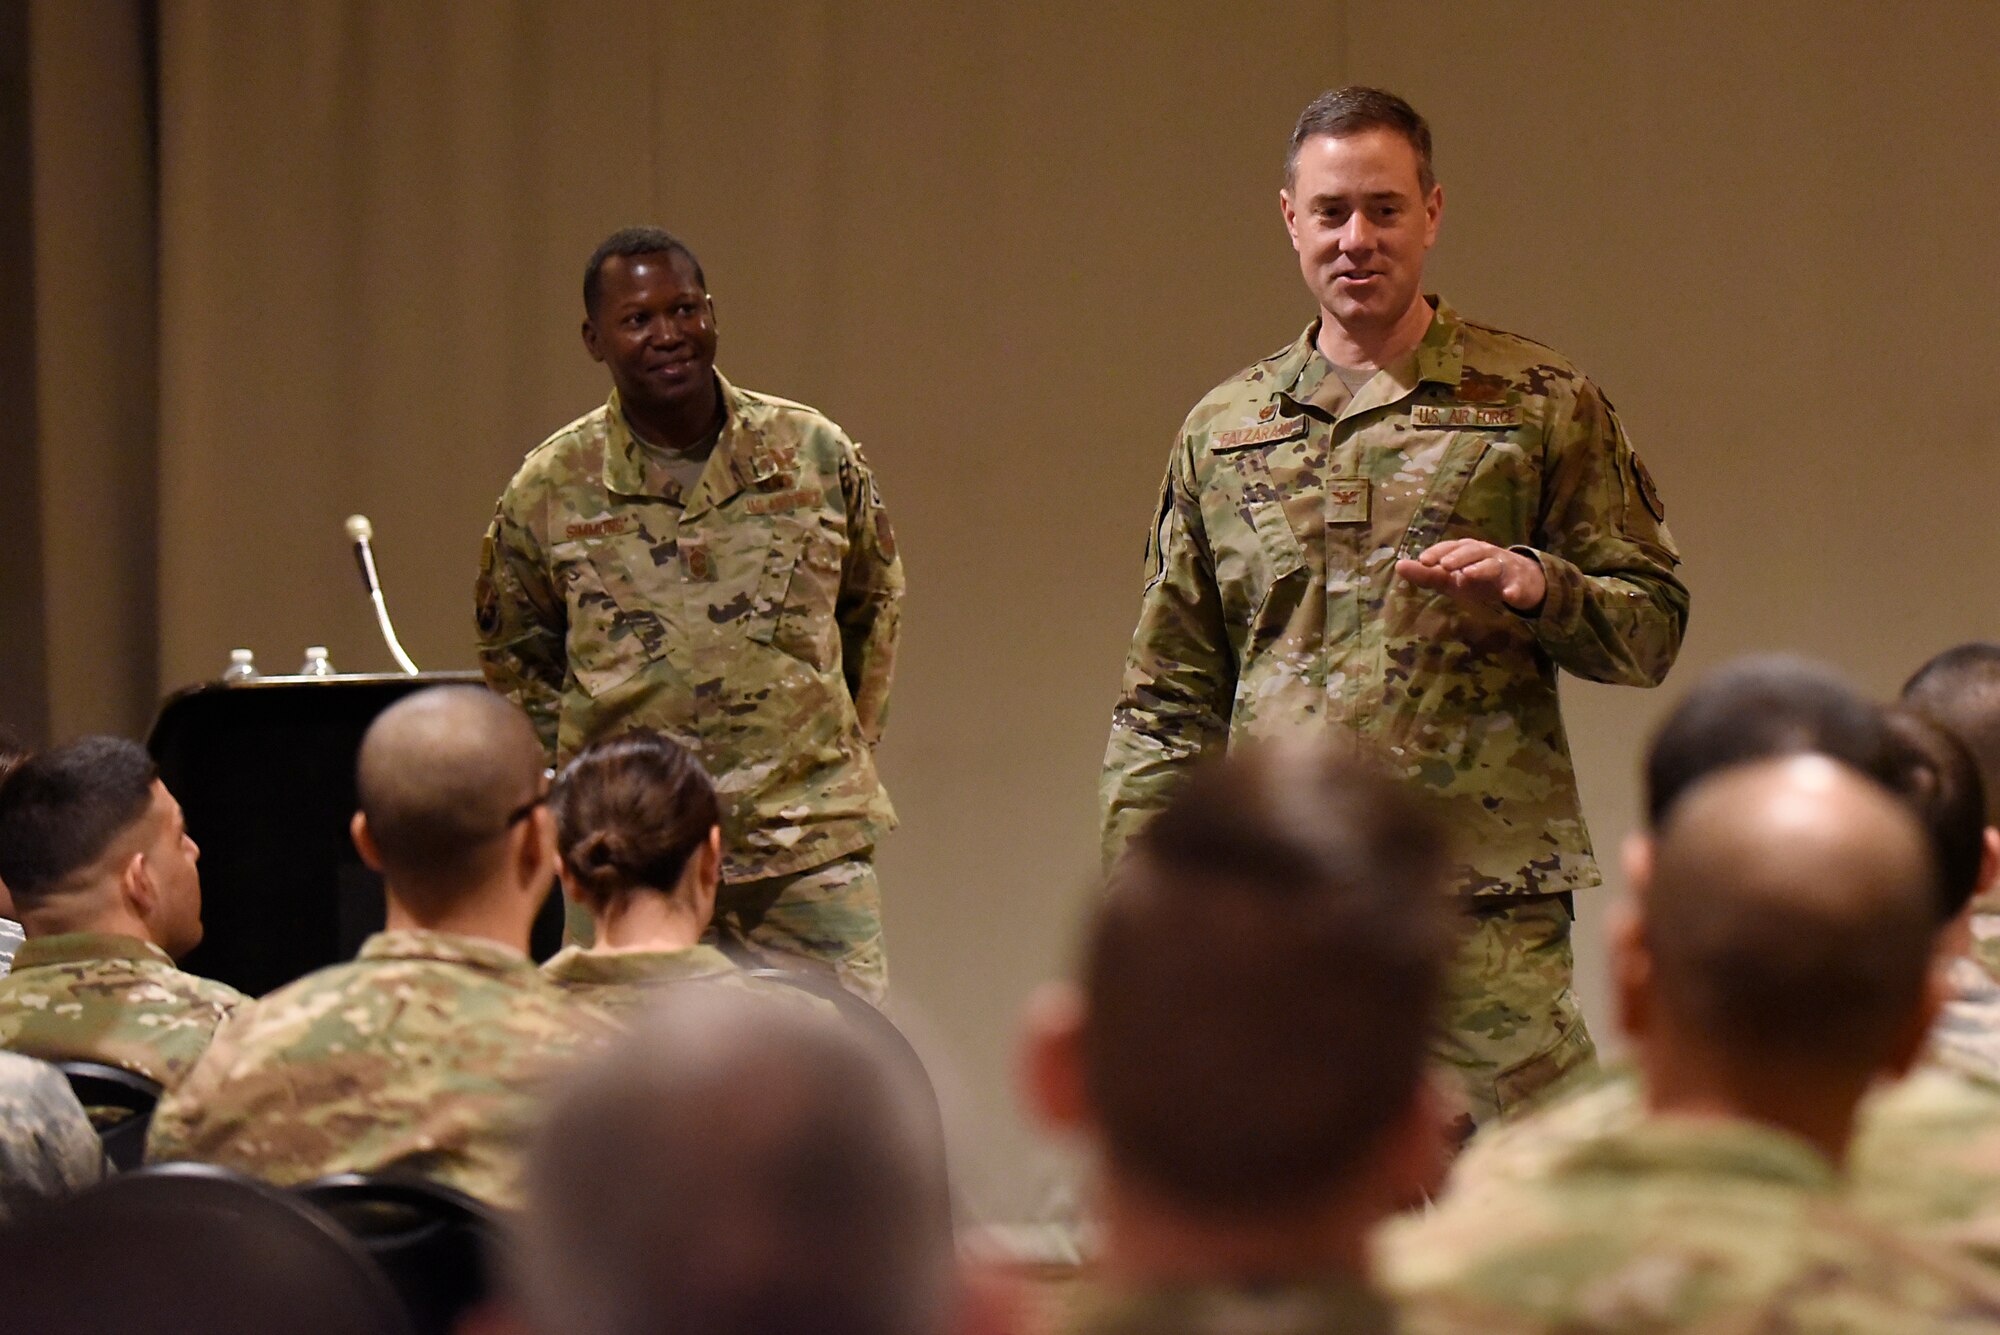 Col. Thomas Falzarano, 21st Space Wing commander, and 21st SW Command Chief, Chief Master Sgt. Jacob Simmons, spoke to the Airmen of Thule Air Base, Greenland during an all call July 19, 2019. At the end of the all call, the 21st SW leadership opened the floor up for questions from the Airmen. (U.S. Air Force photo by Staff Sgt. Alexandra M. Longfellow)